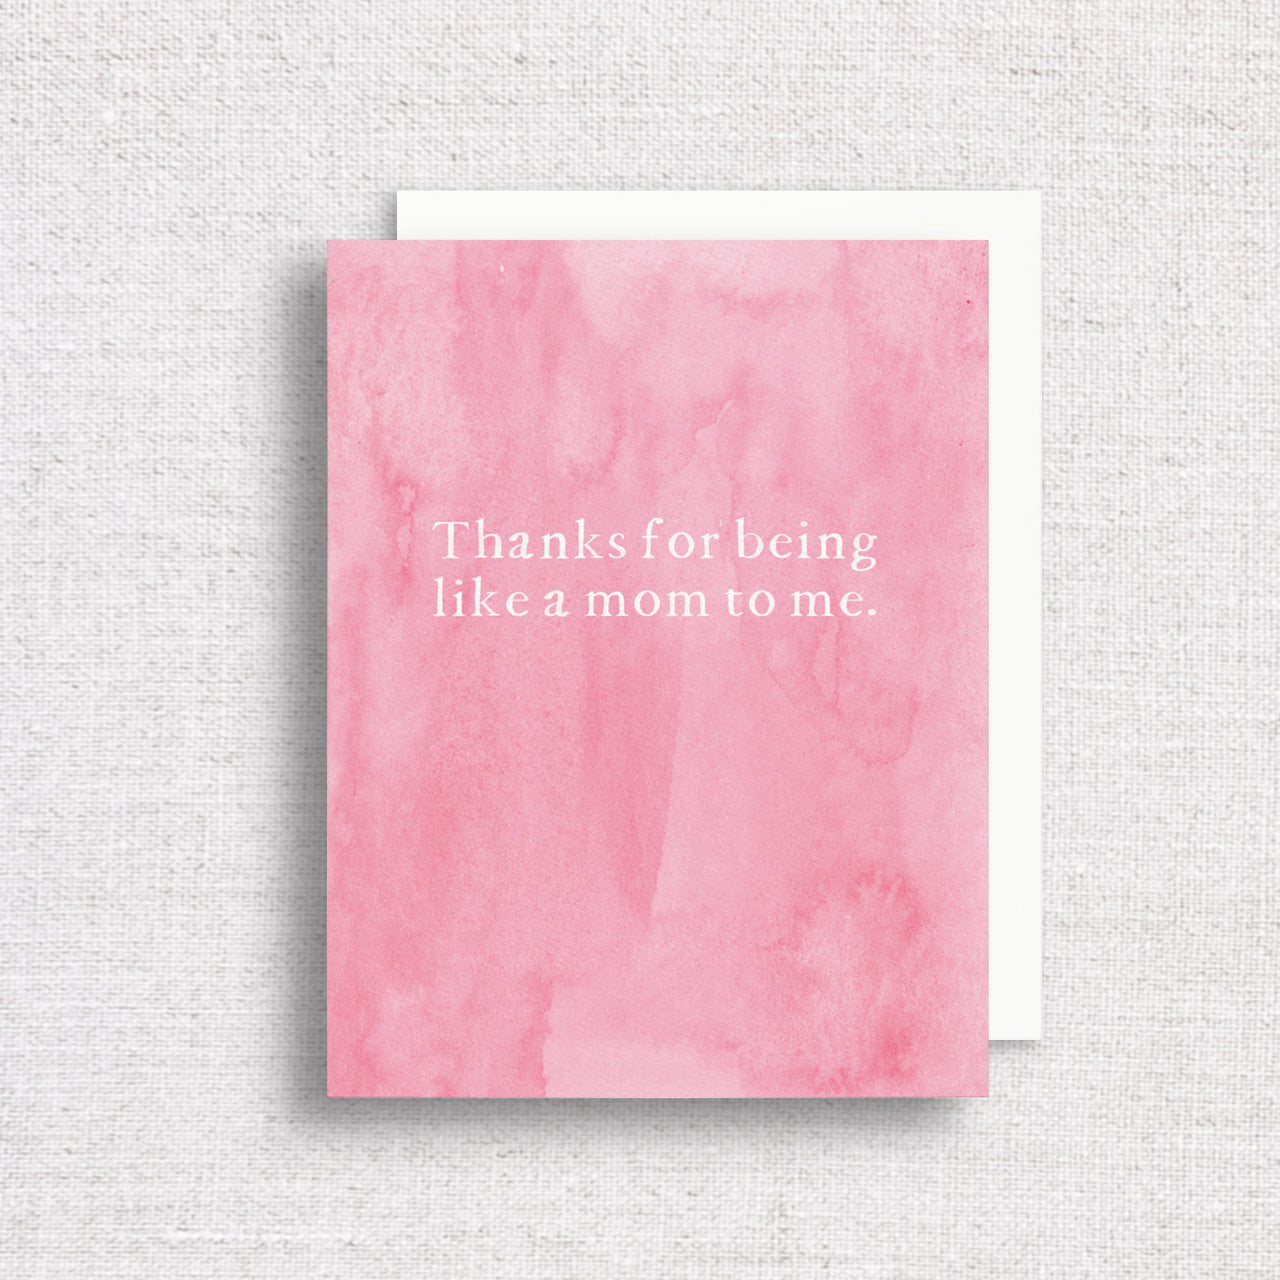 Thanks for Being Like a Mom to Me Greeting Card by Gert & Co